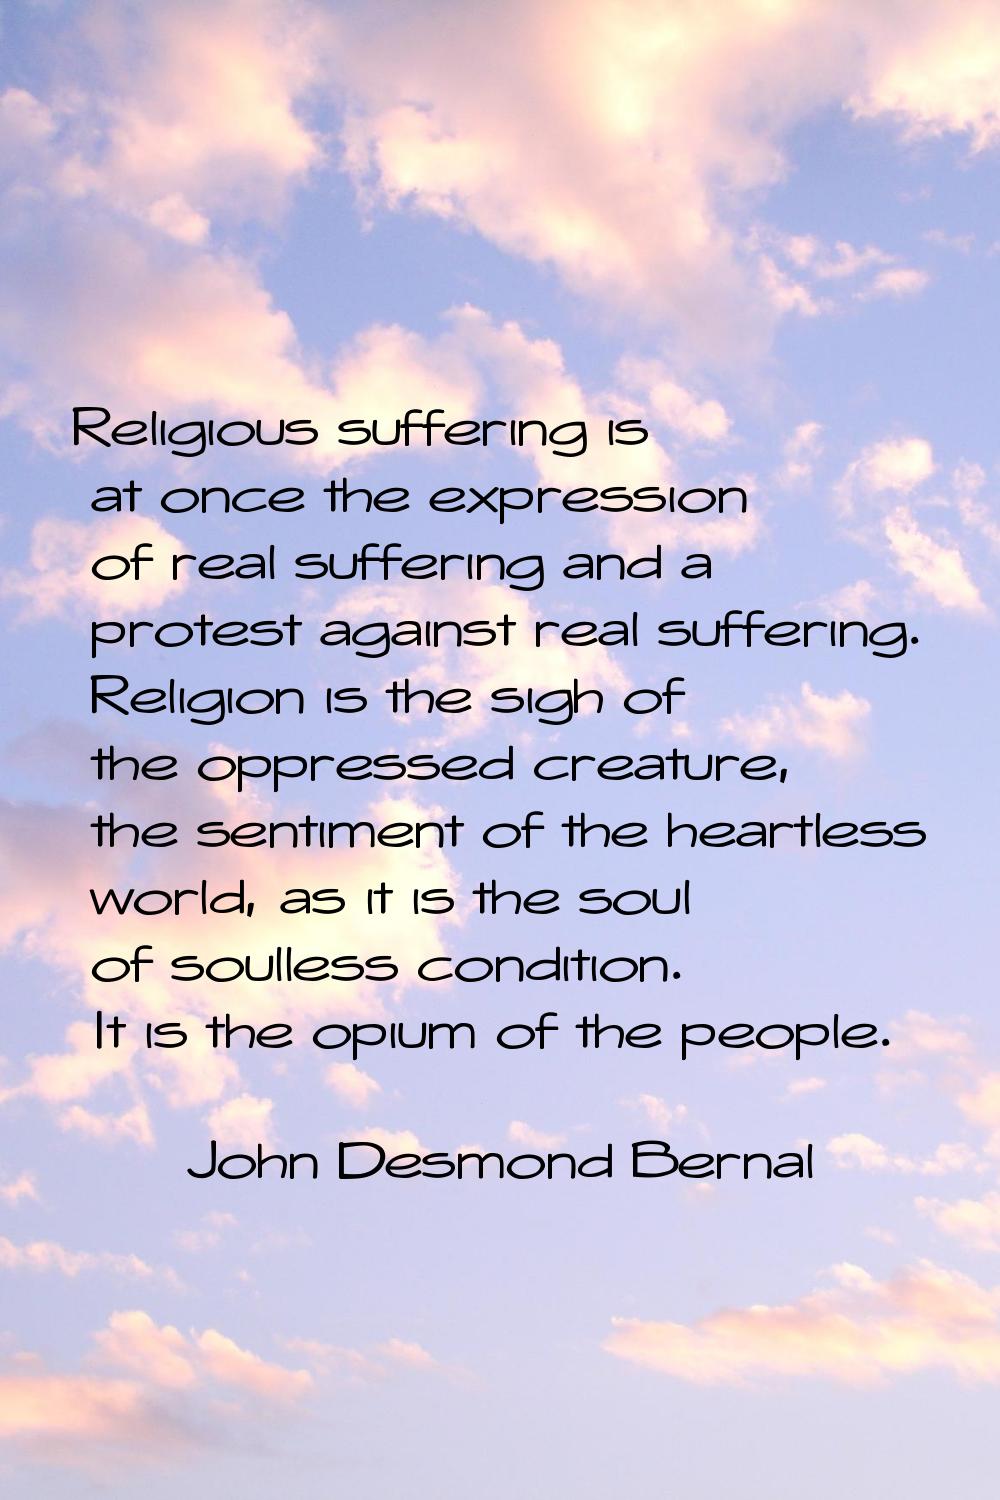 Religious suffering is at once the expression of real suffering and a protest against real sufferin